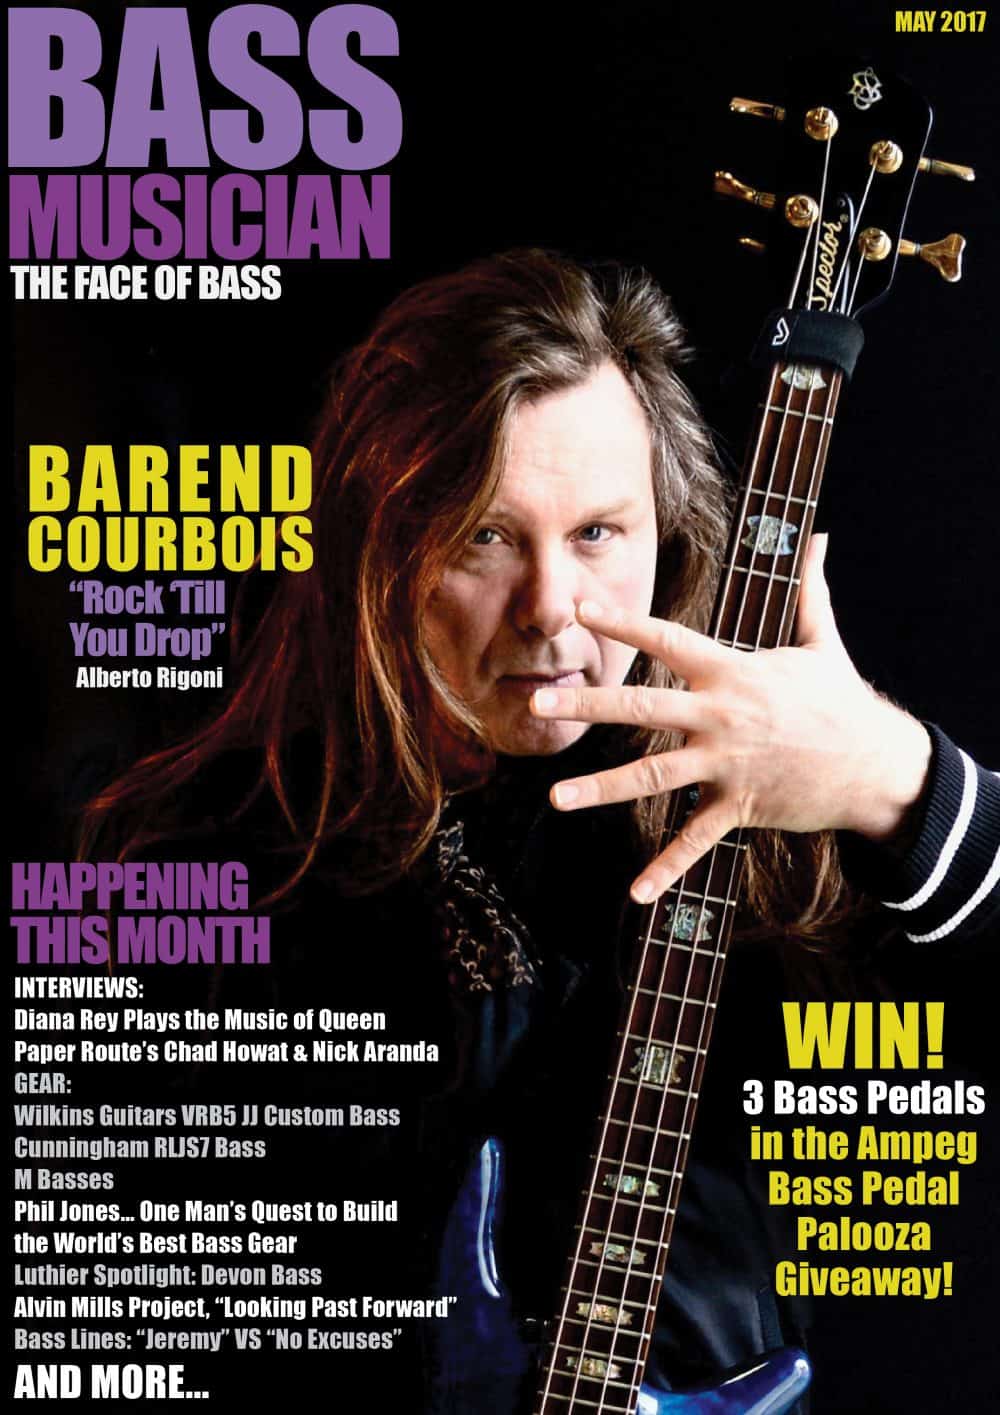 Bass Musician Magazine Cover - May 2017